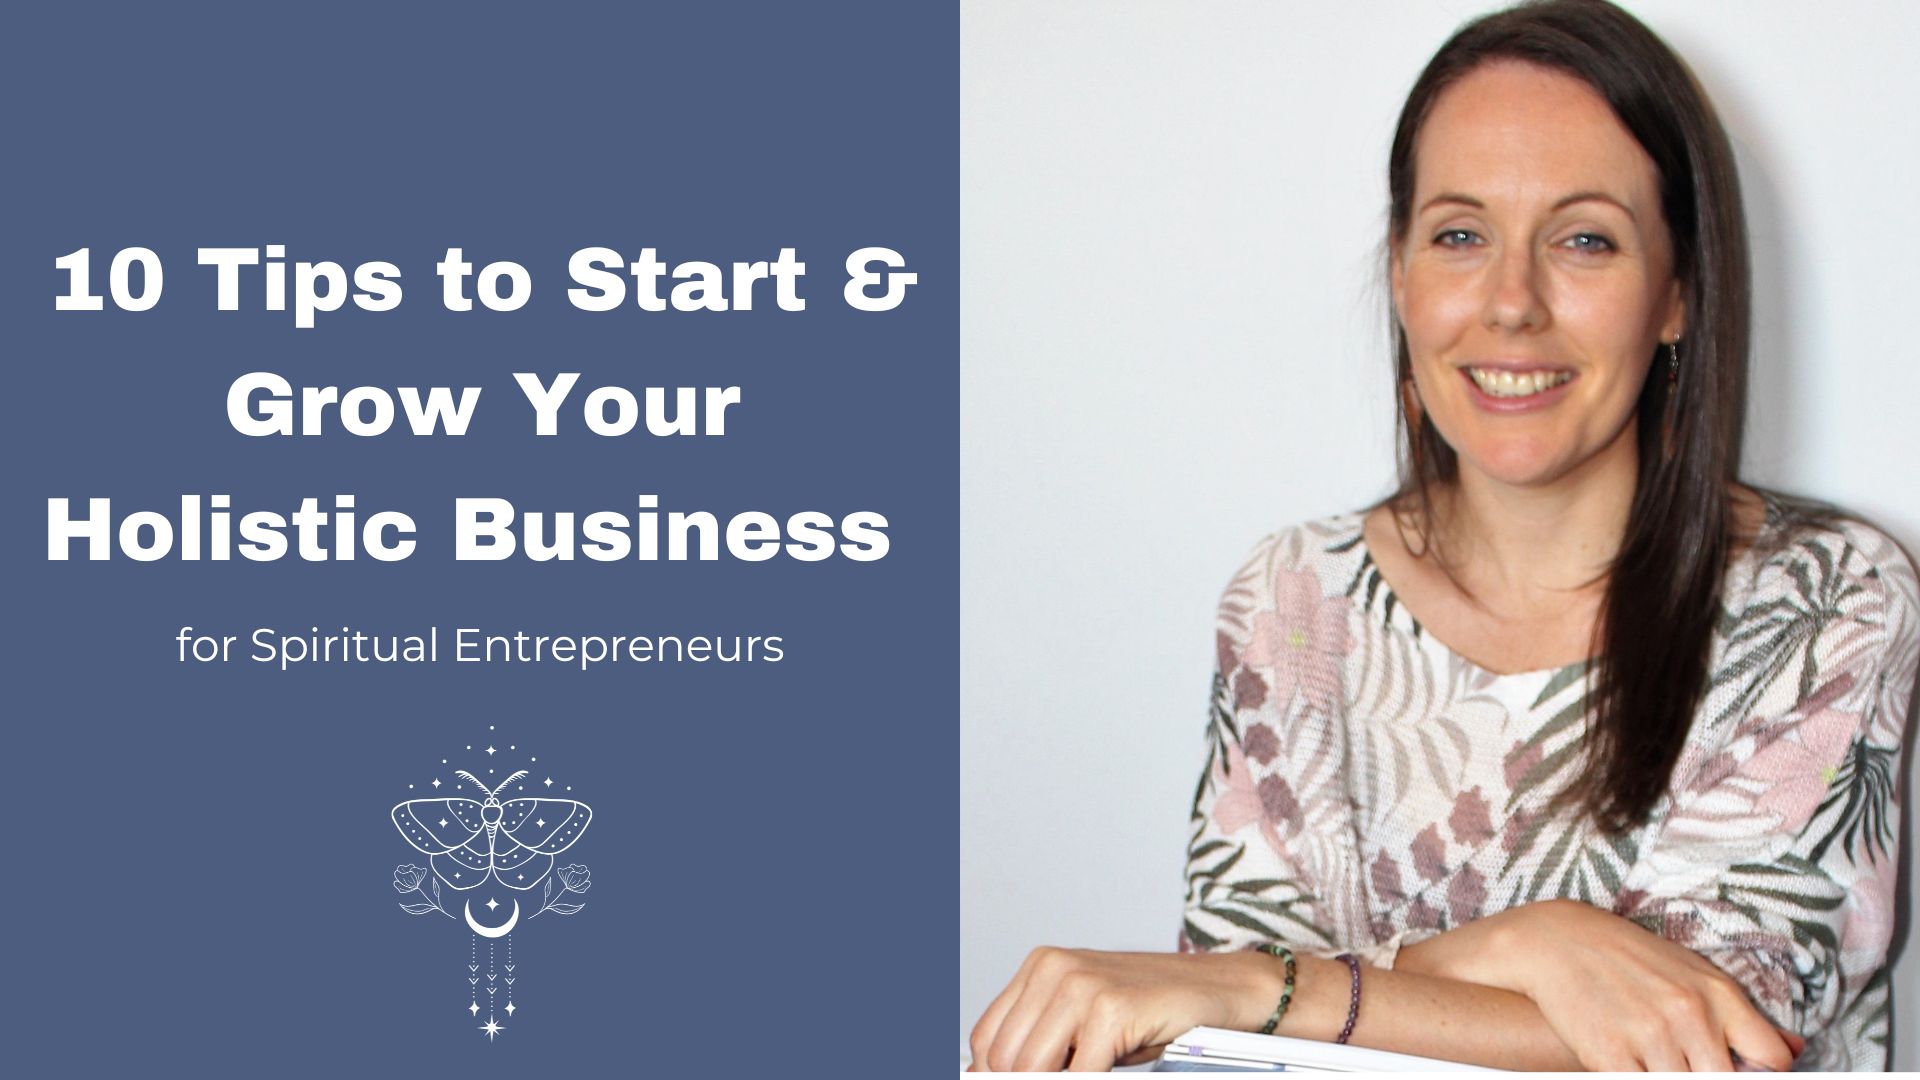 10 Tips to Start your Holistic Business for Spiritual Entrepreneurs- Marketing, Pricing, Niche